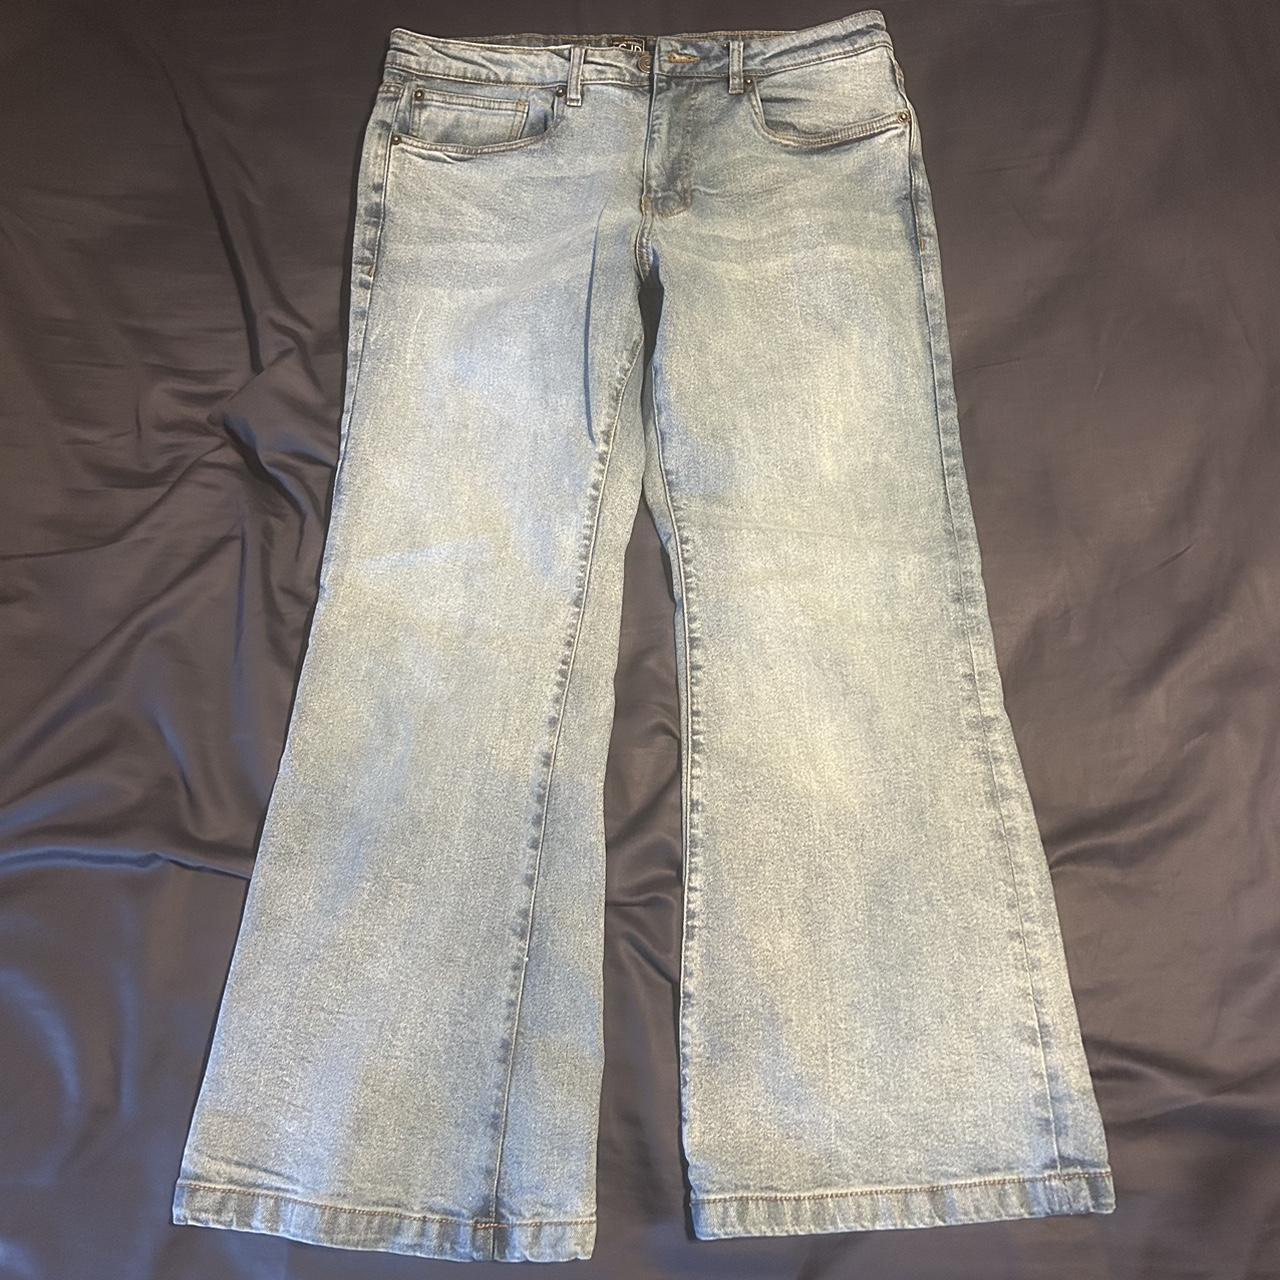 LCJ bell bottom flares Only worn once. In perfect... - Depop